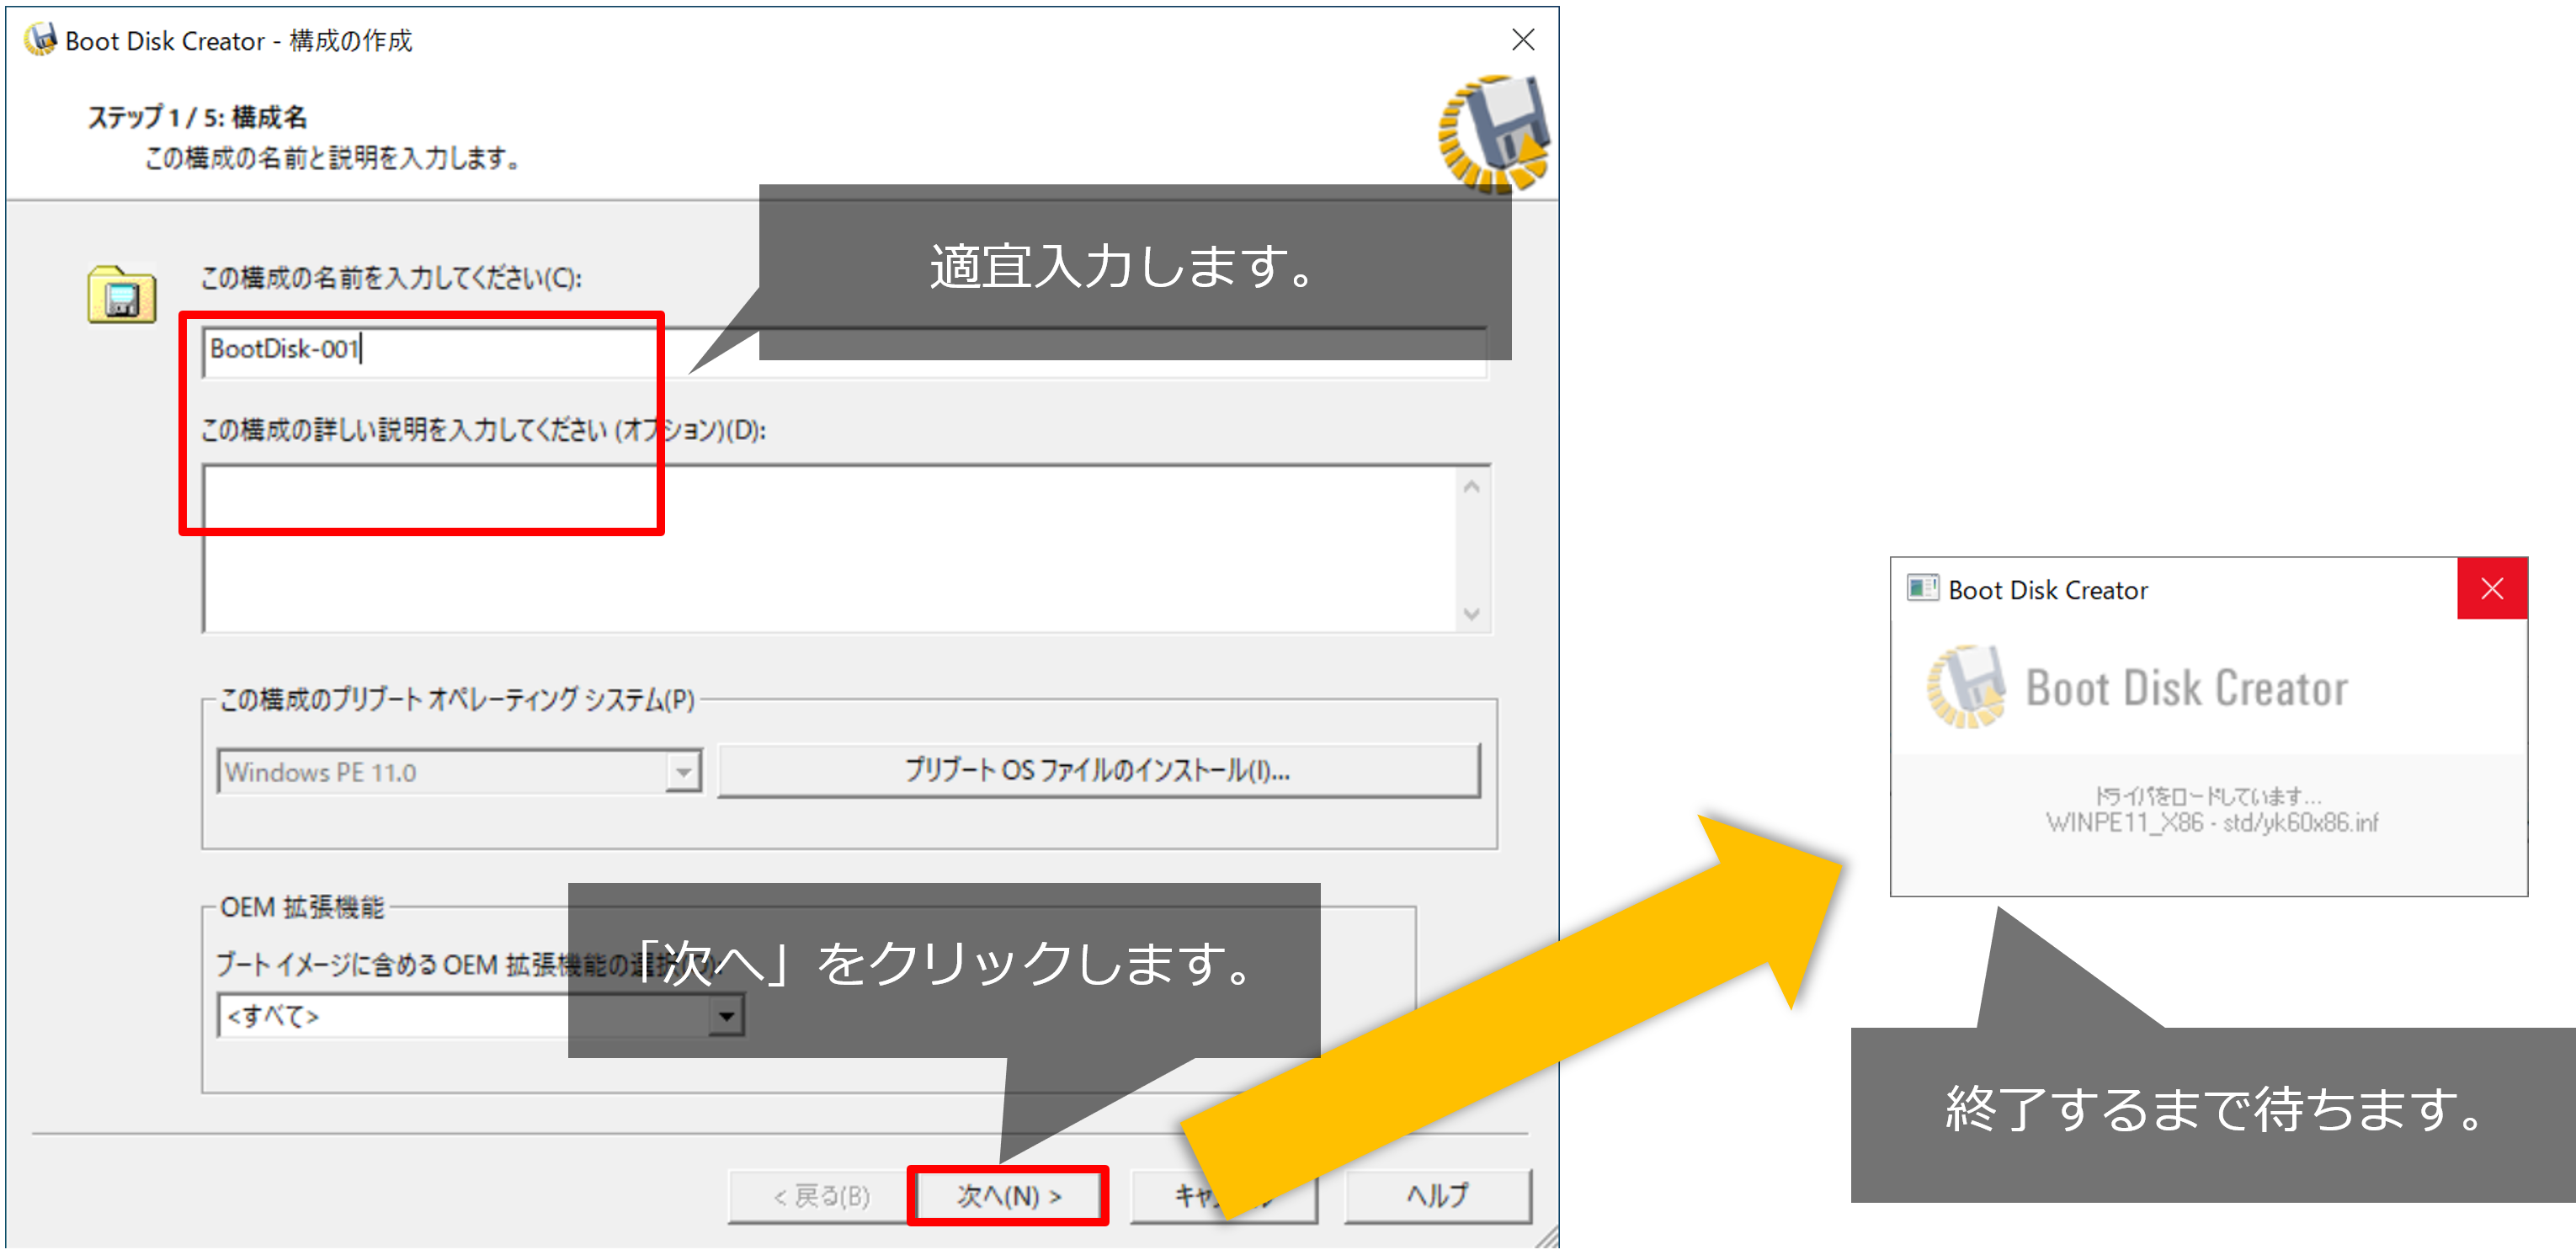 https://licensecounter.jp/engineer-voice/blog/uploads/0215bb7e3ded8bf5f2261b1fdf2c6a38c3e21147.png